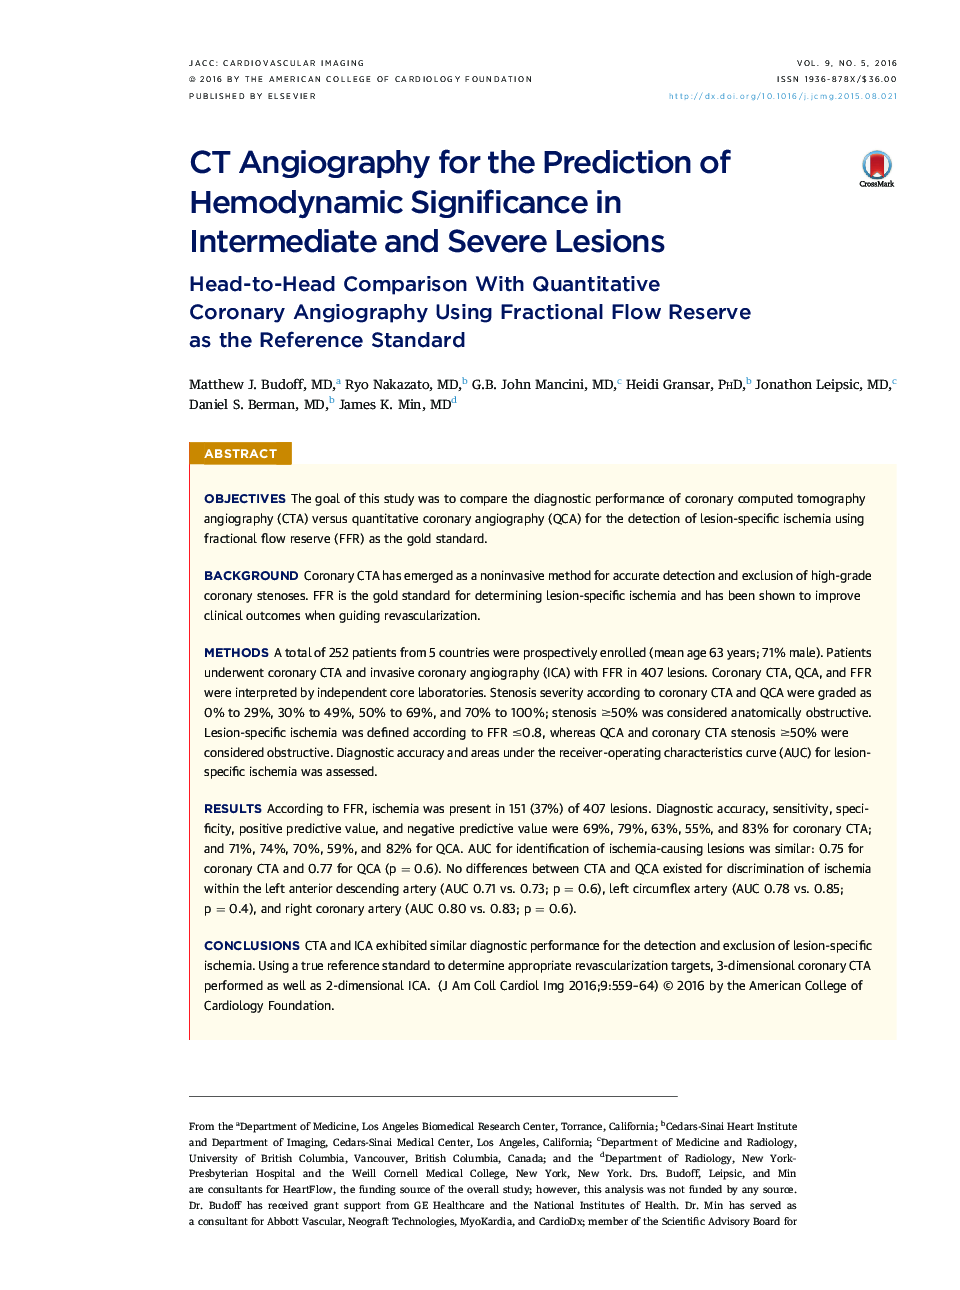 CT Angiography for the Prediction of Hemodynamic Significance in Intermediate and Severe Lesions : Head-to-Head Comparison With Quantitative Coronary Angiography Using Fractional Flow Reserve as the Reference Standard